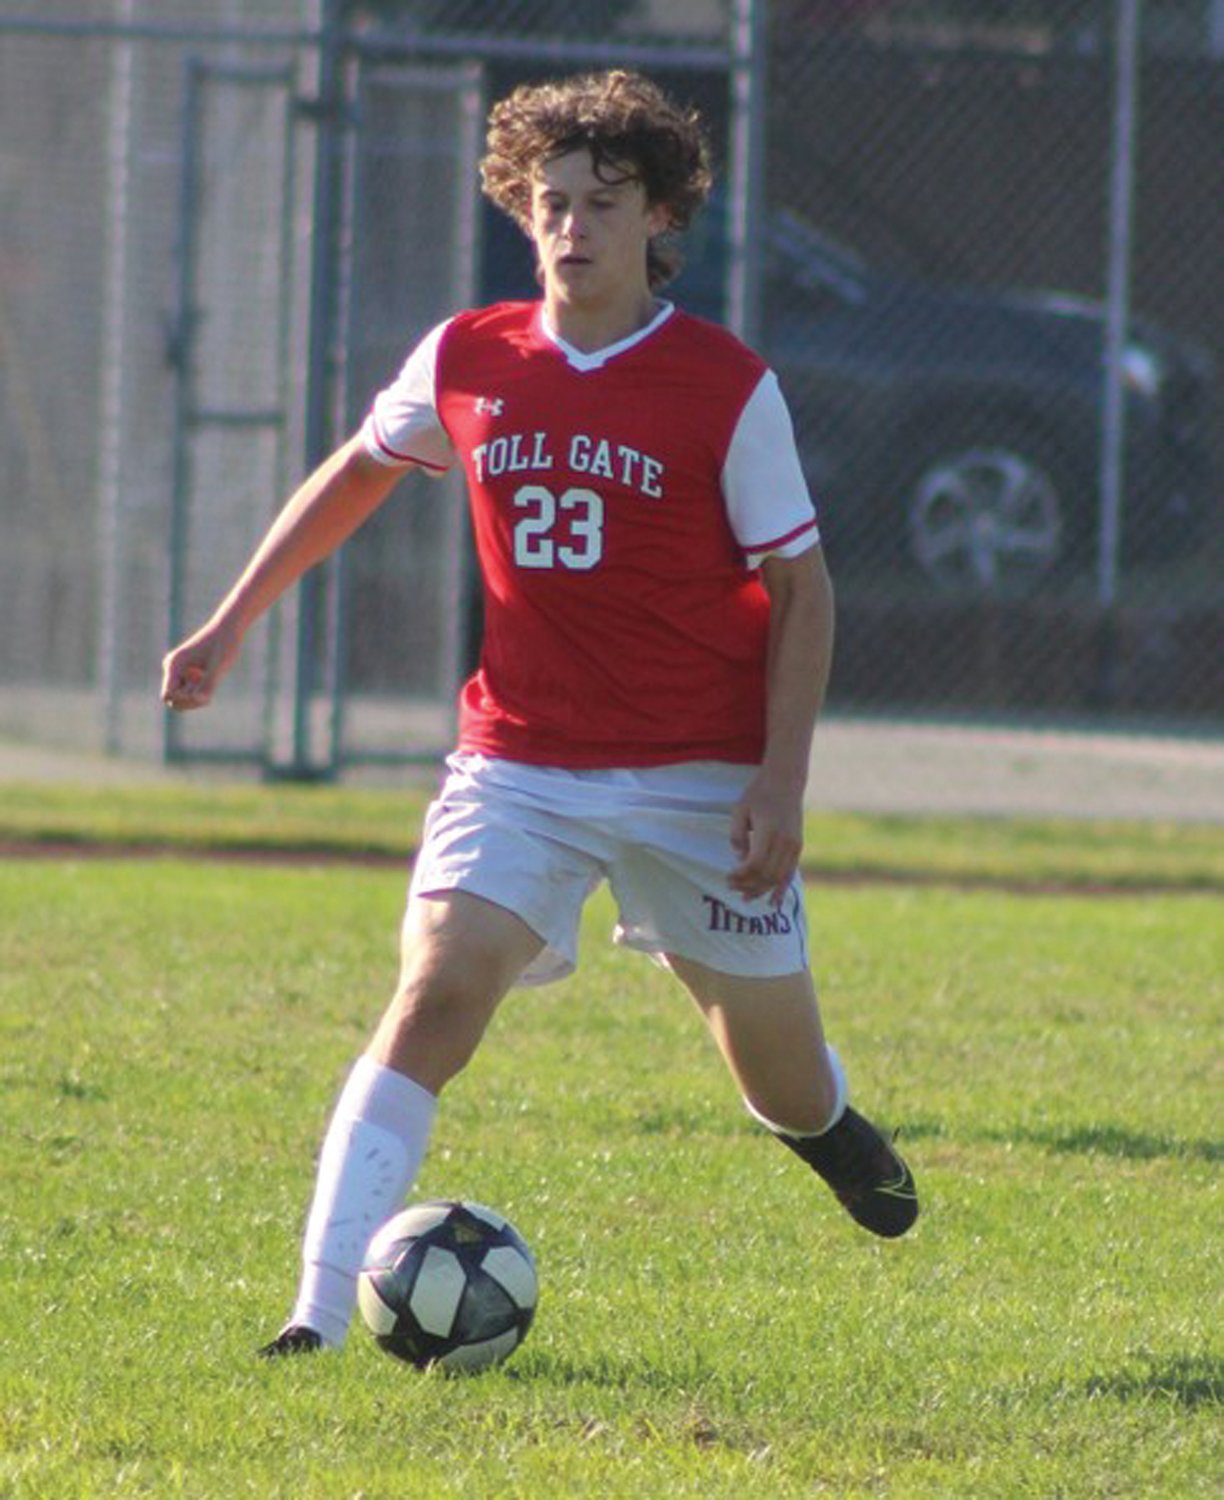 DRIBBLING: Toll Gate’s Jonah LaFauci takes the ball up the field last week.